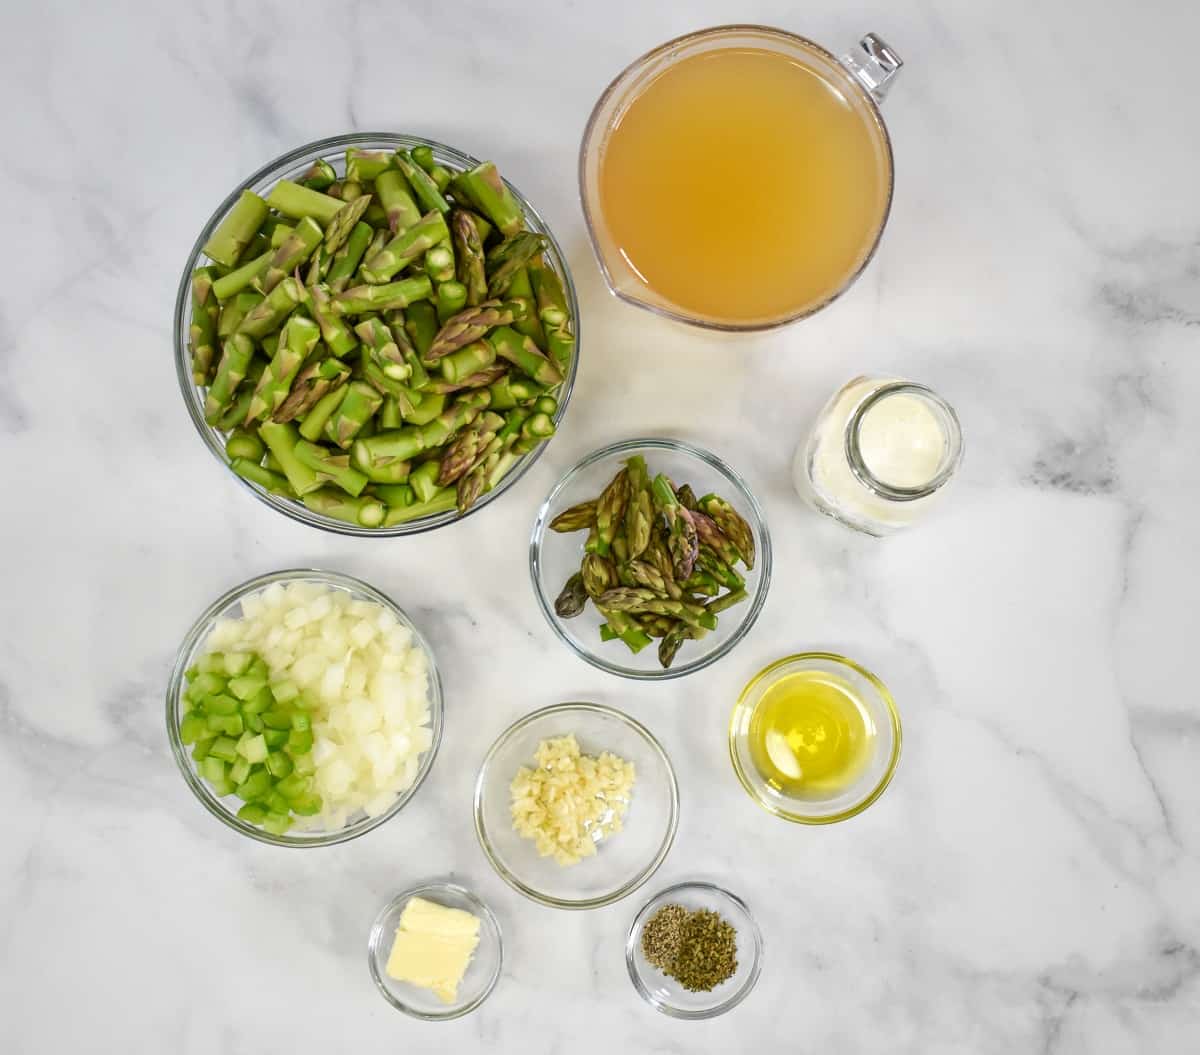 The ingredients for the cream of asparagus soup prepped and separated in glass bowls arranged on a white table.